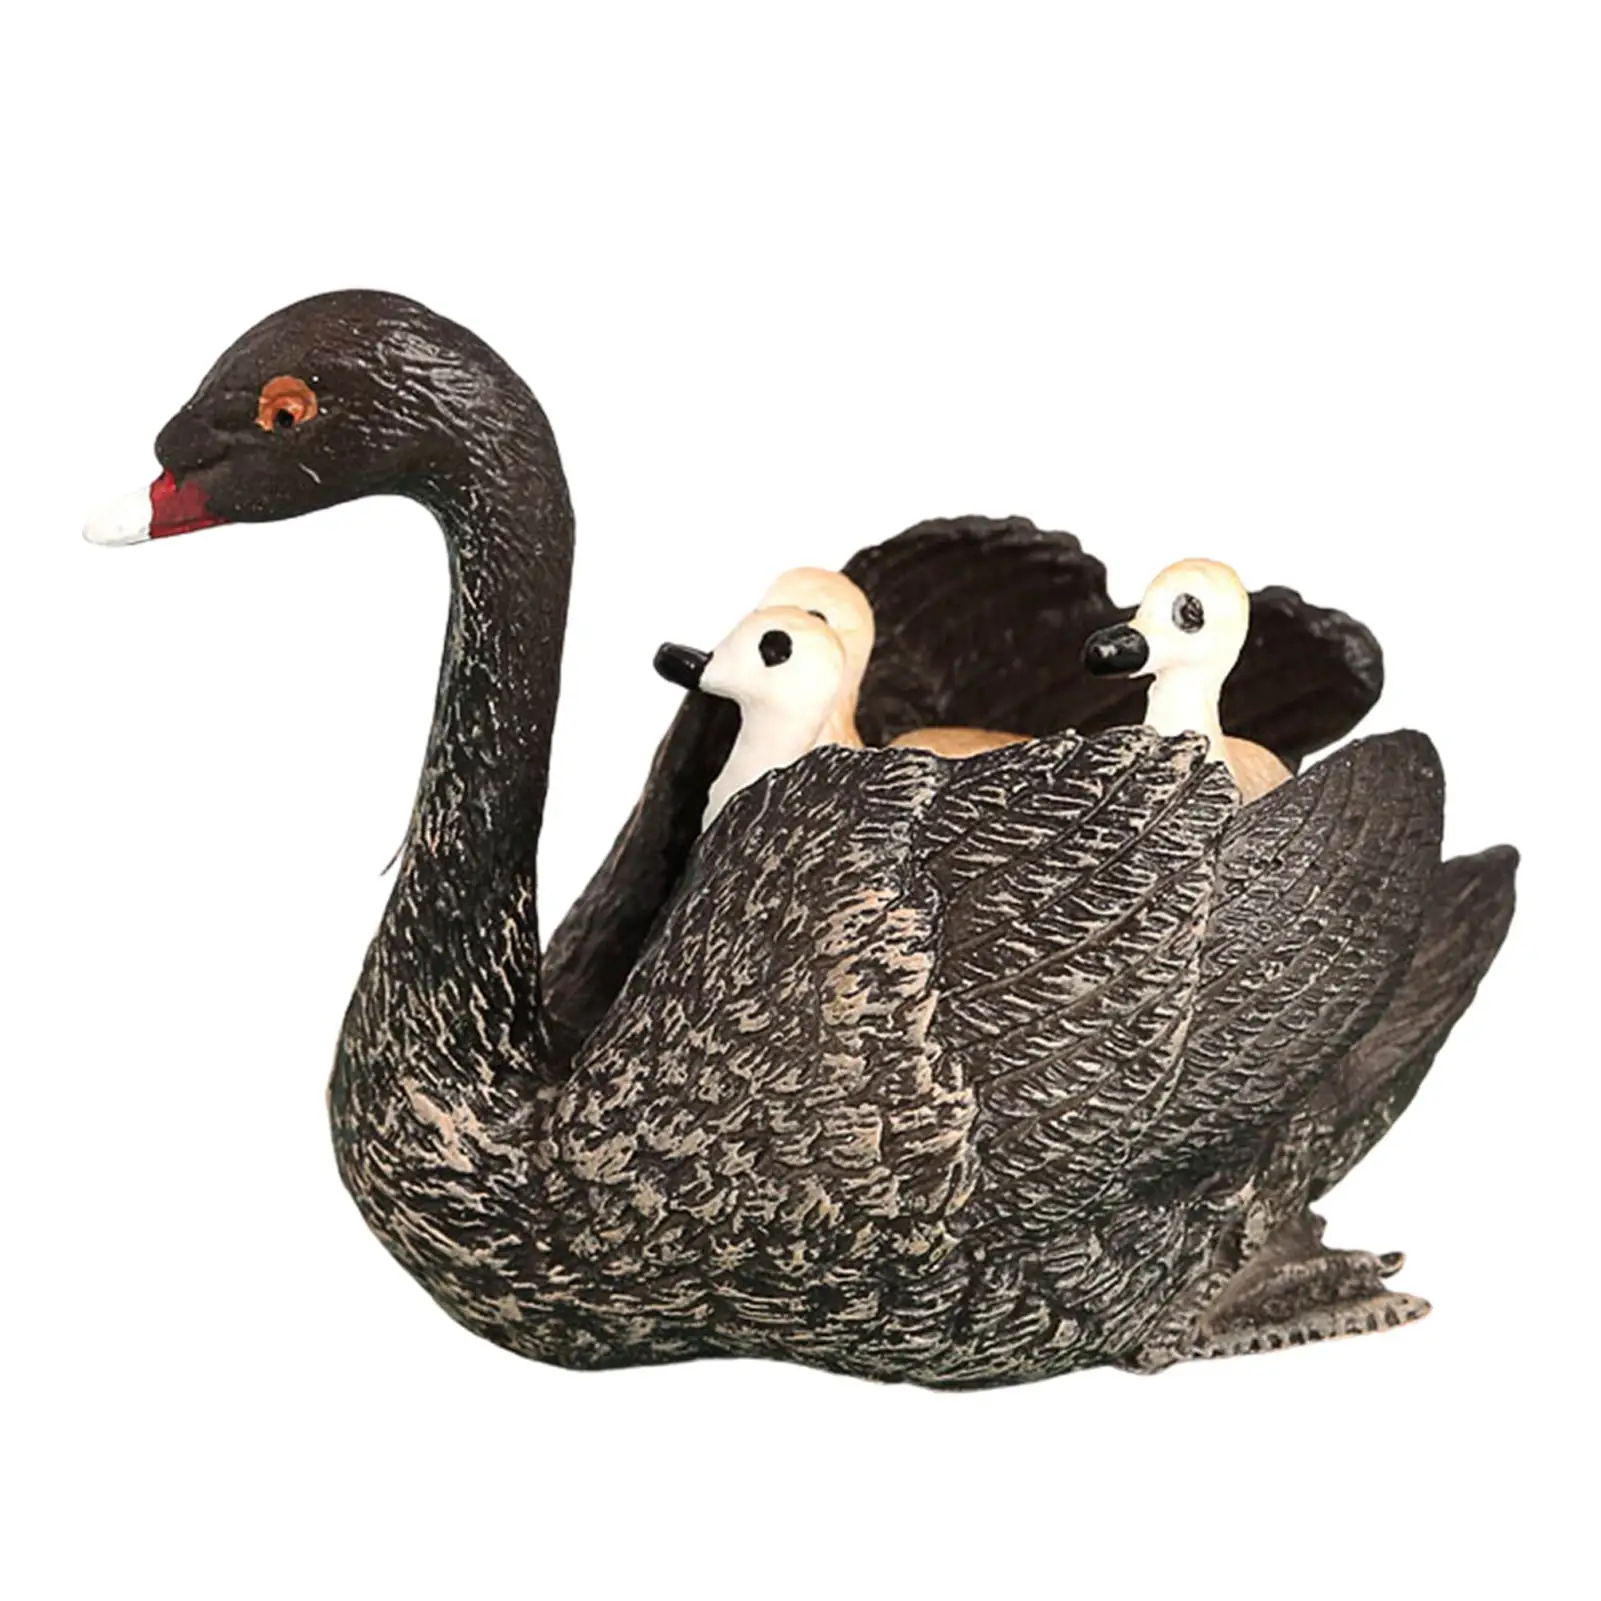 

Swan Toys Black Geese Figurines Realistic Farm Animals Preschool Animals Figures Educational Project Diorama Model Toy For Kids